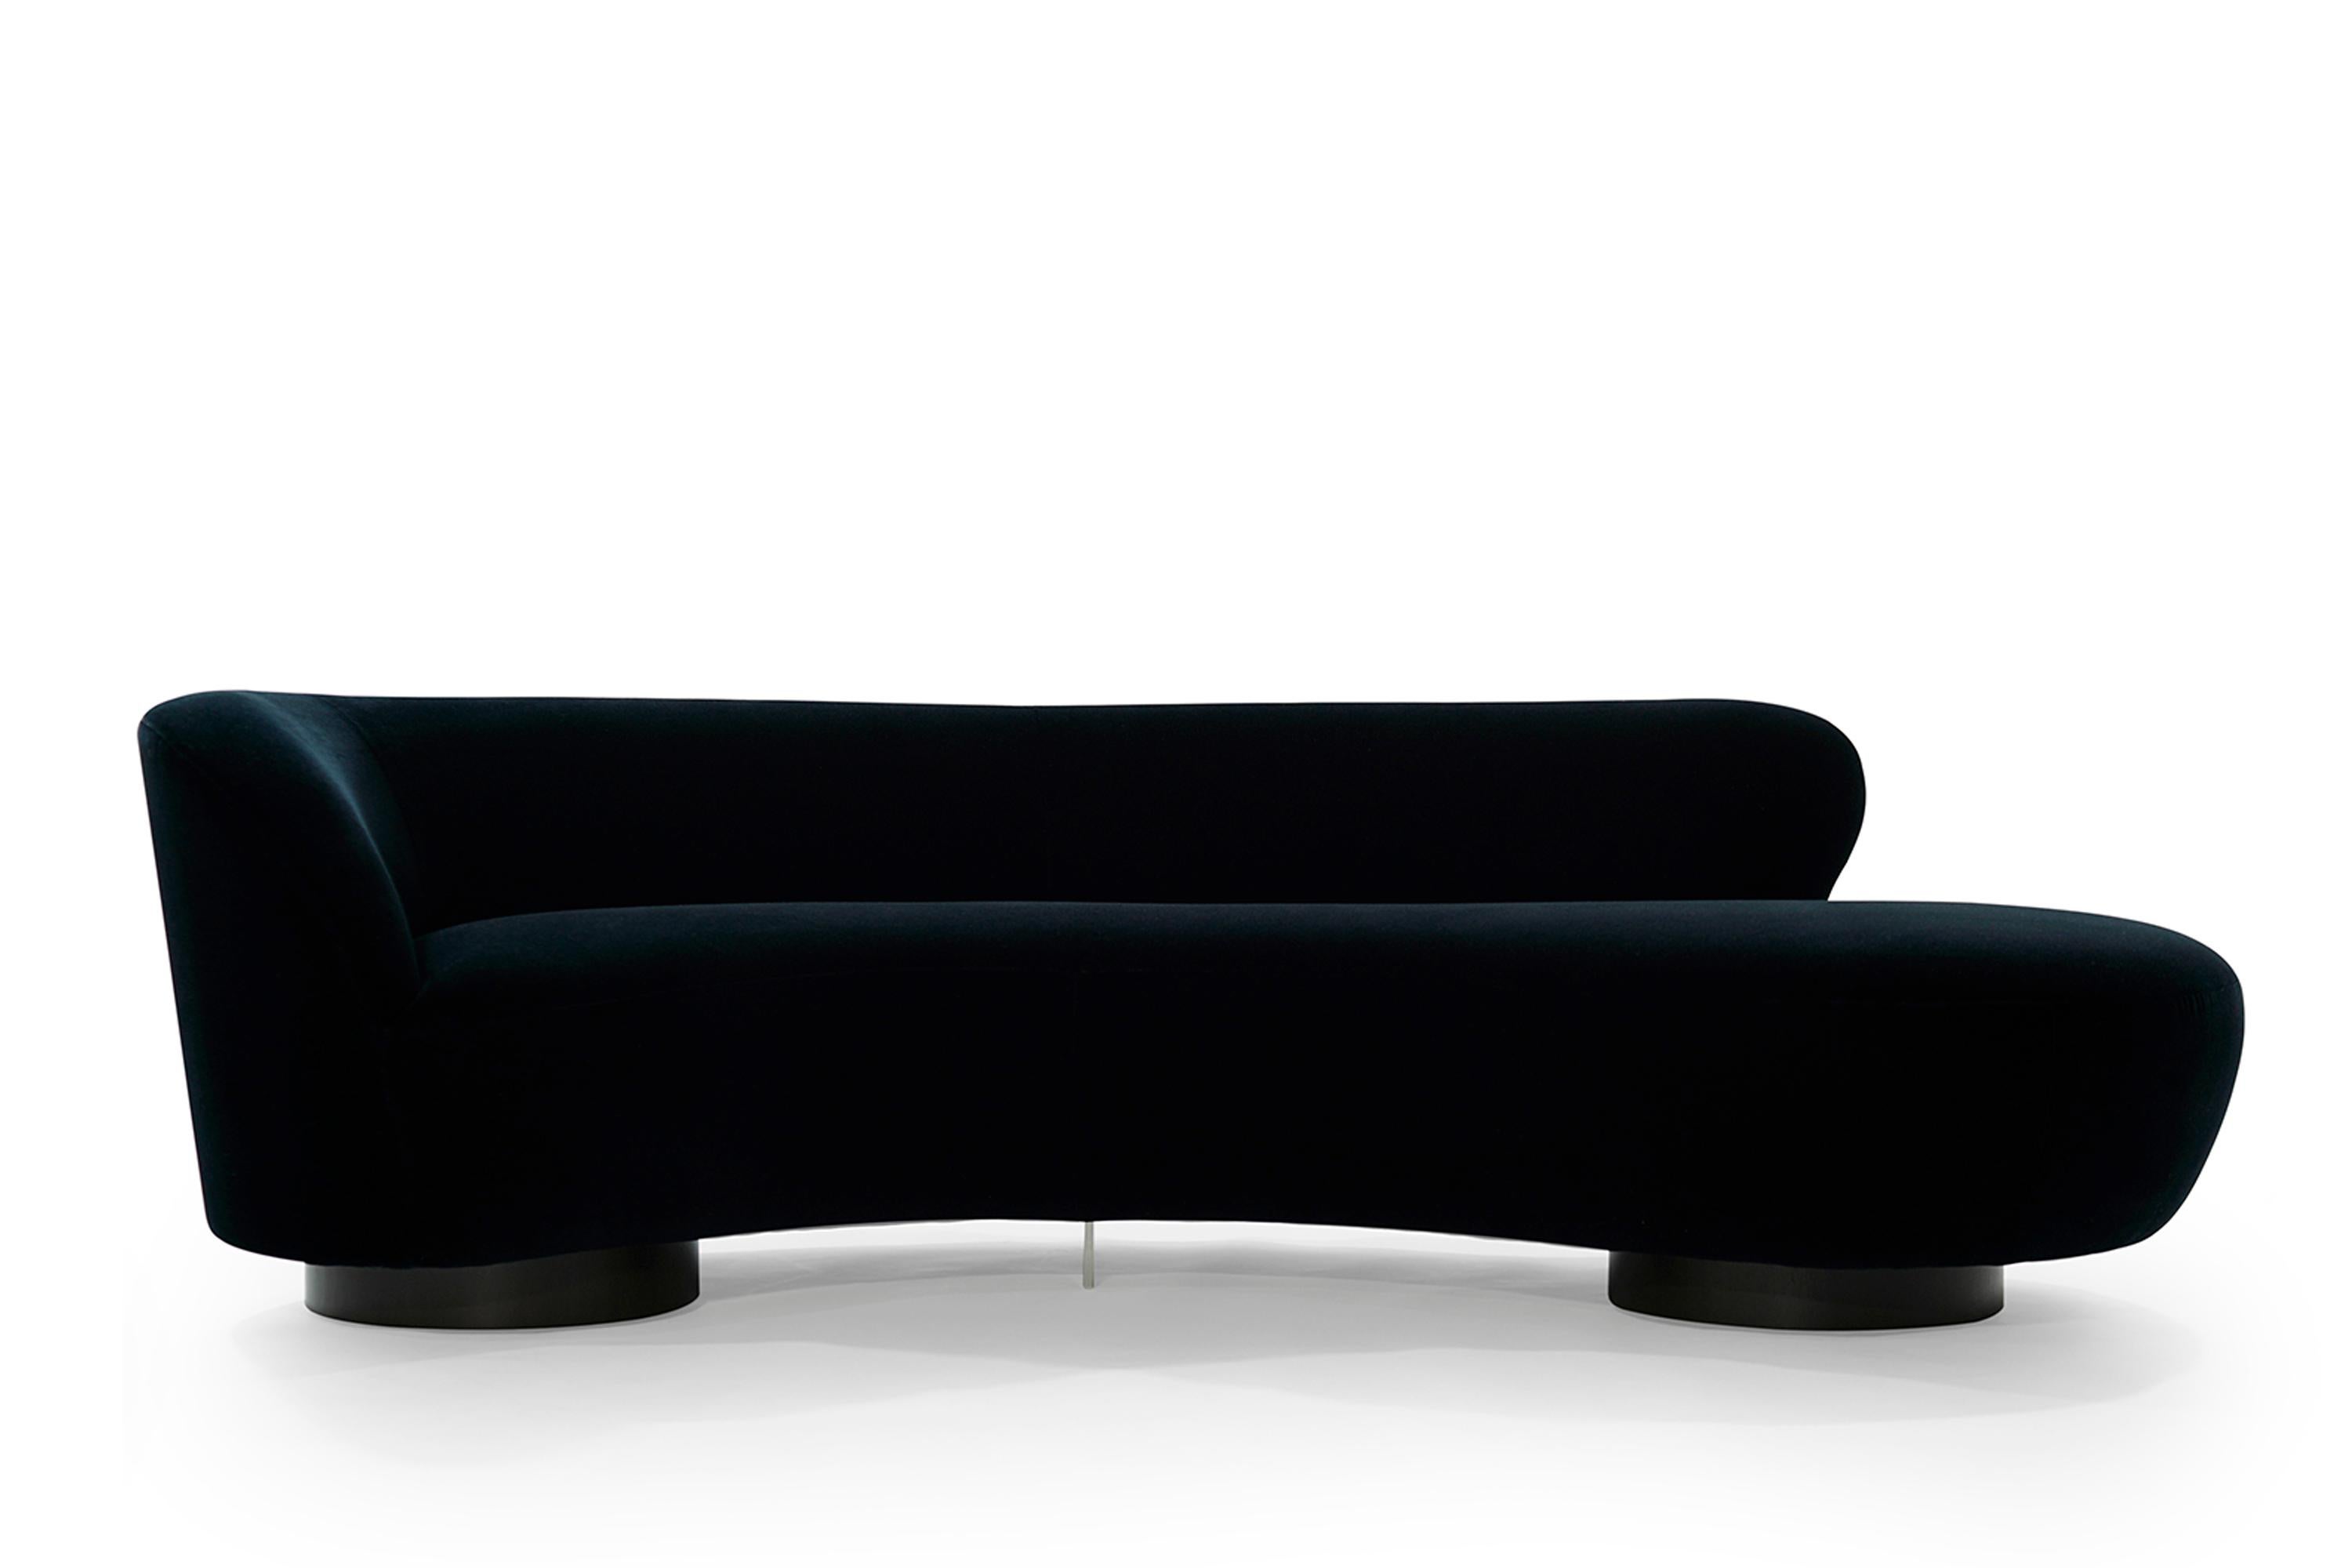 Stunning serpentine or cloud sofa designed by the late Vladimir Kagan for Directional, circa 1970s.

Completely restored down to its very frame, spring system, foam, straps and Dacron have all been updated. Re-upholstered in a stunningly beautiful